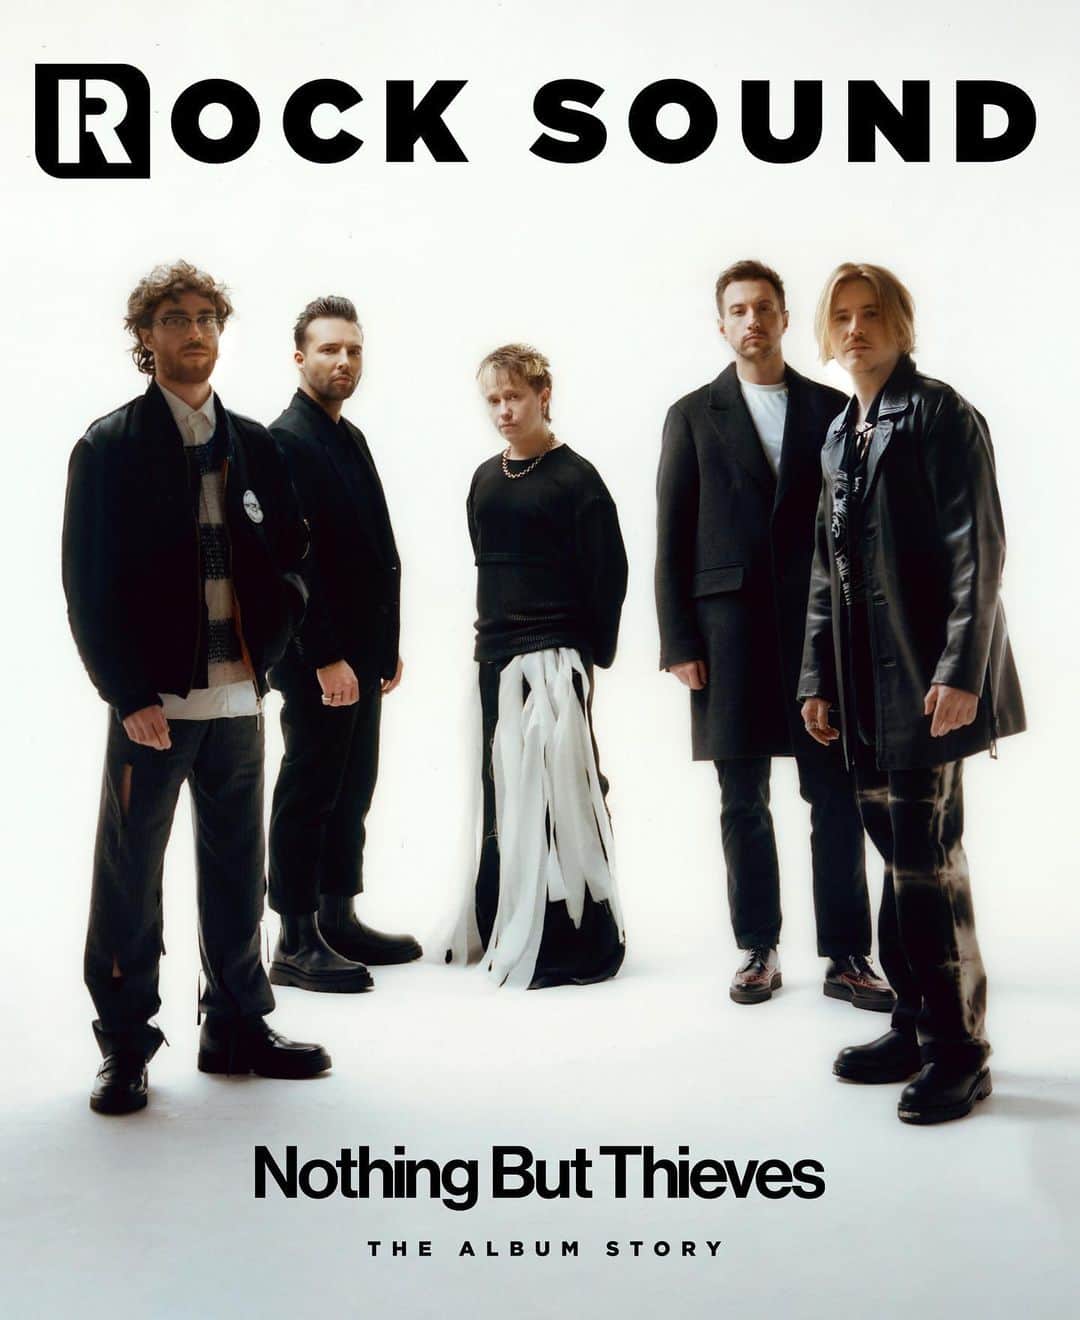 Rock Soundのインスタグラム：「Nothing But Thieves, 'Dead Club City' | The Album Story  Conor, Joe and Dom guide us through the making of their ambitious and addictive new concept album  Read the full digital cover feature and watch video highlights from our chat on ROCKSOUND.TV, link in stories  #nothingbutthieves #rock #alternative」